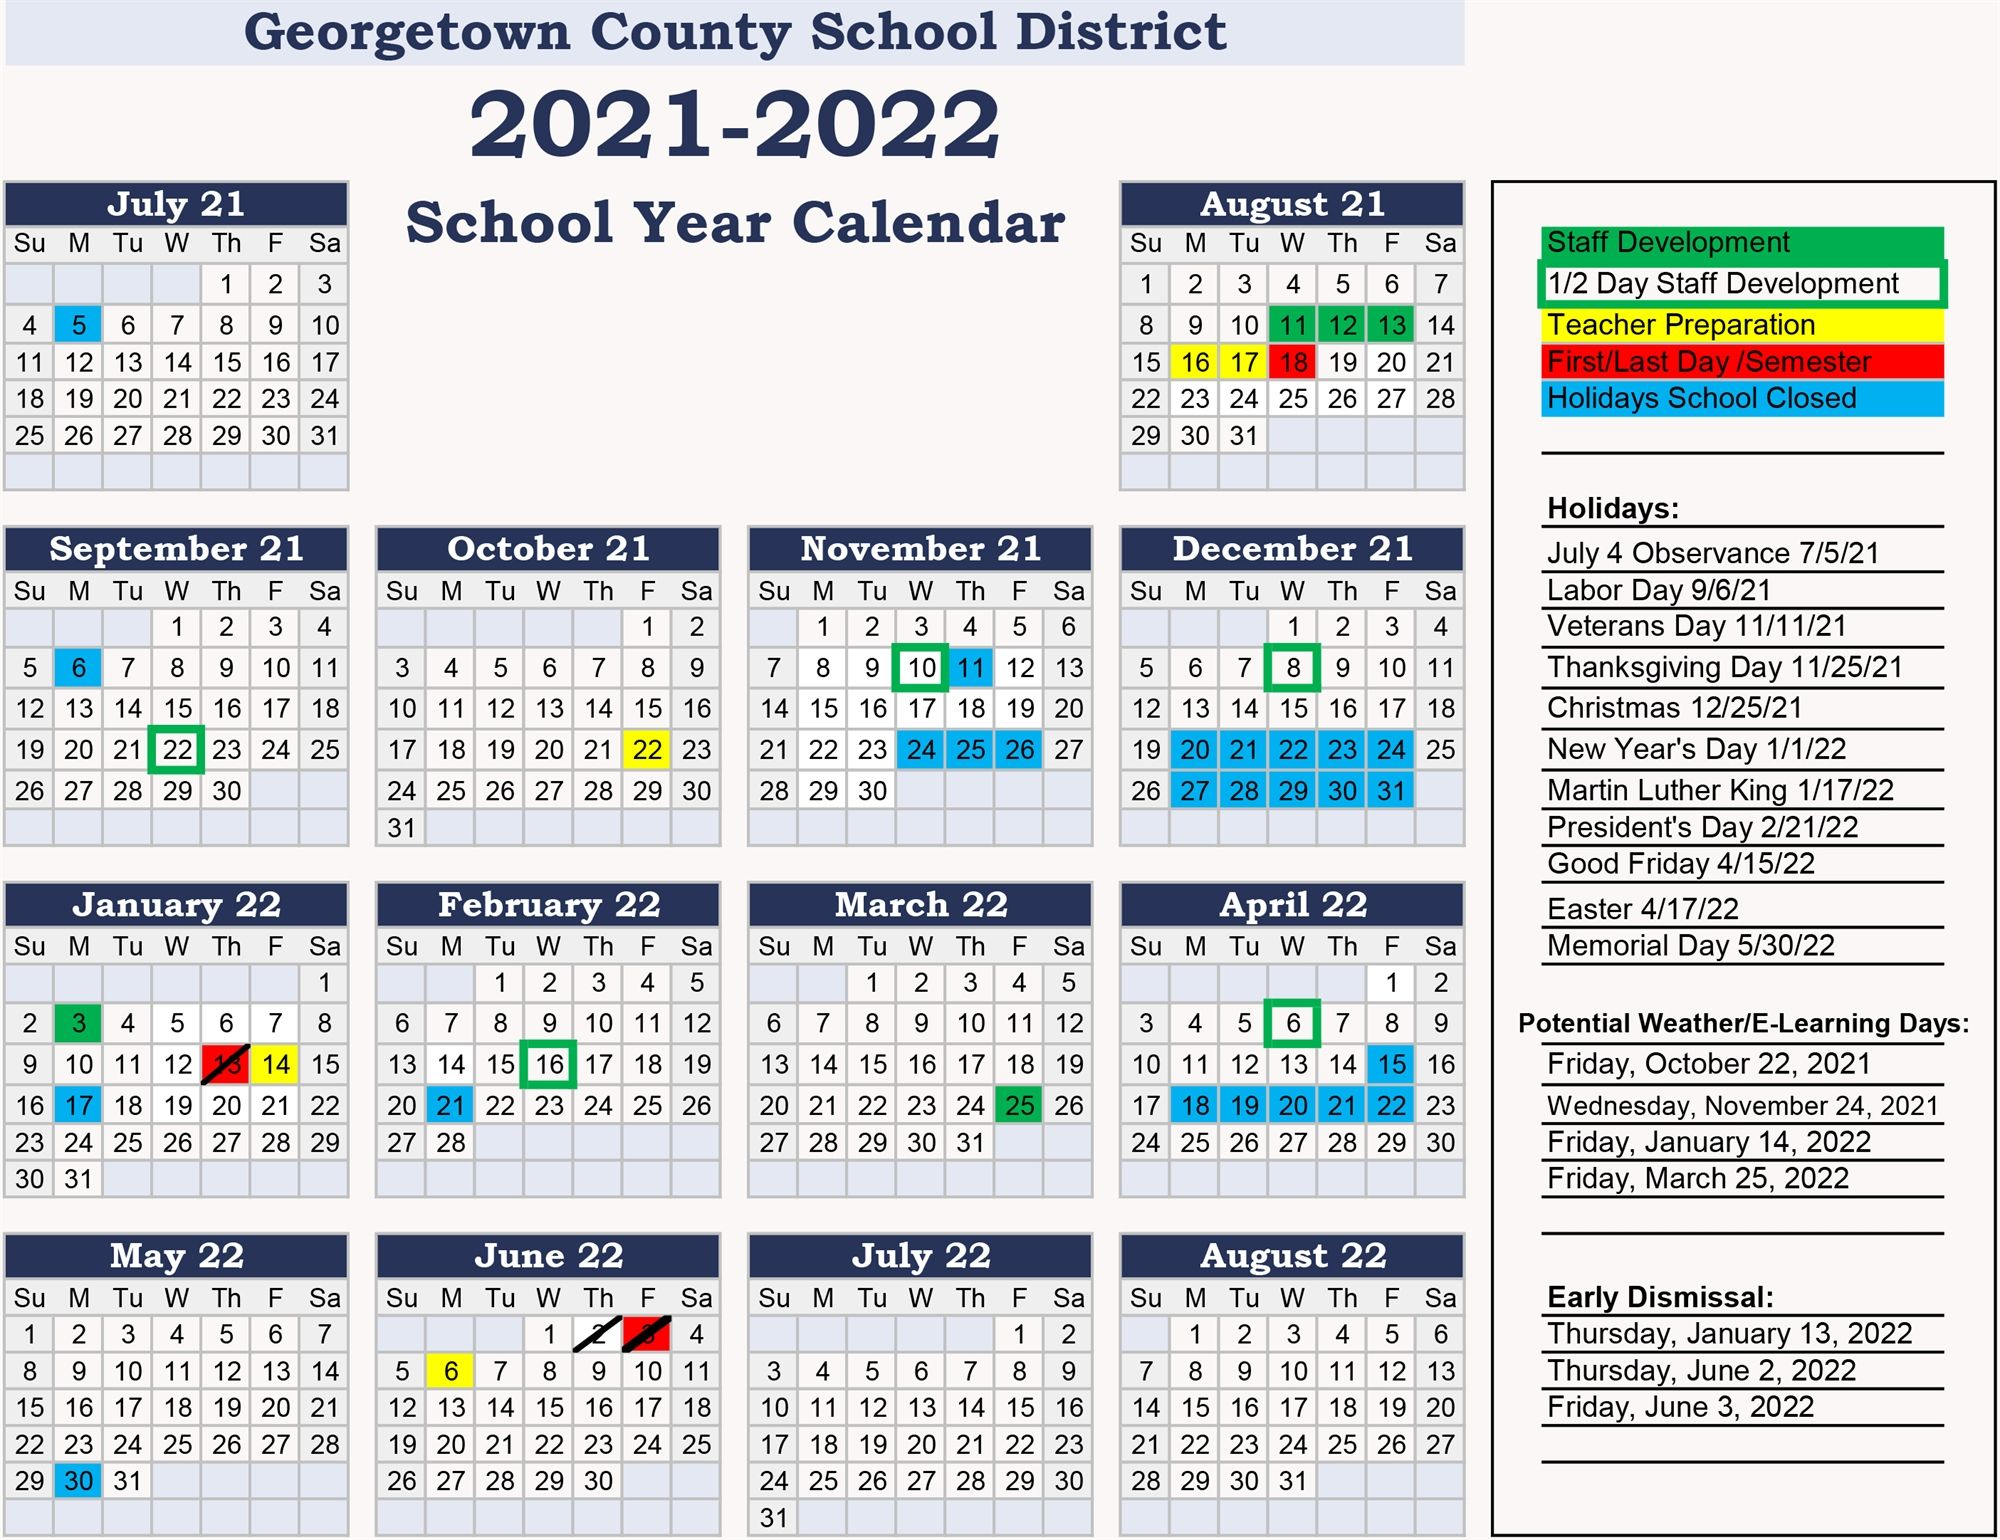 Georgetown County School District Calendar 2021 And 2022